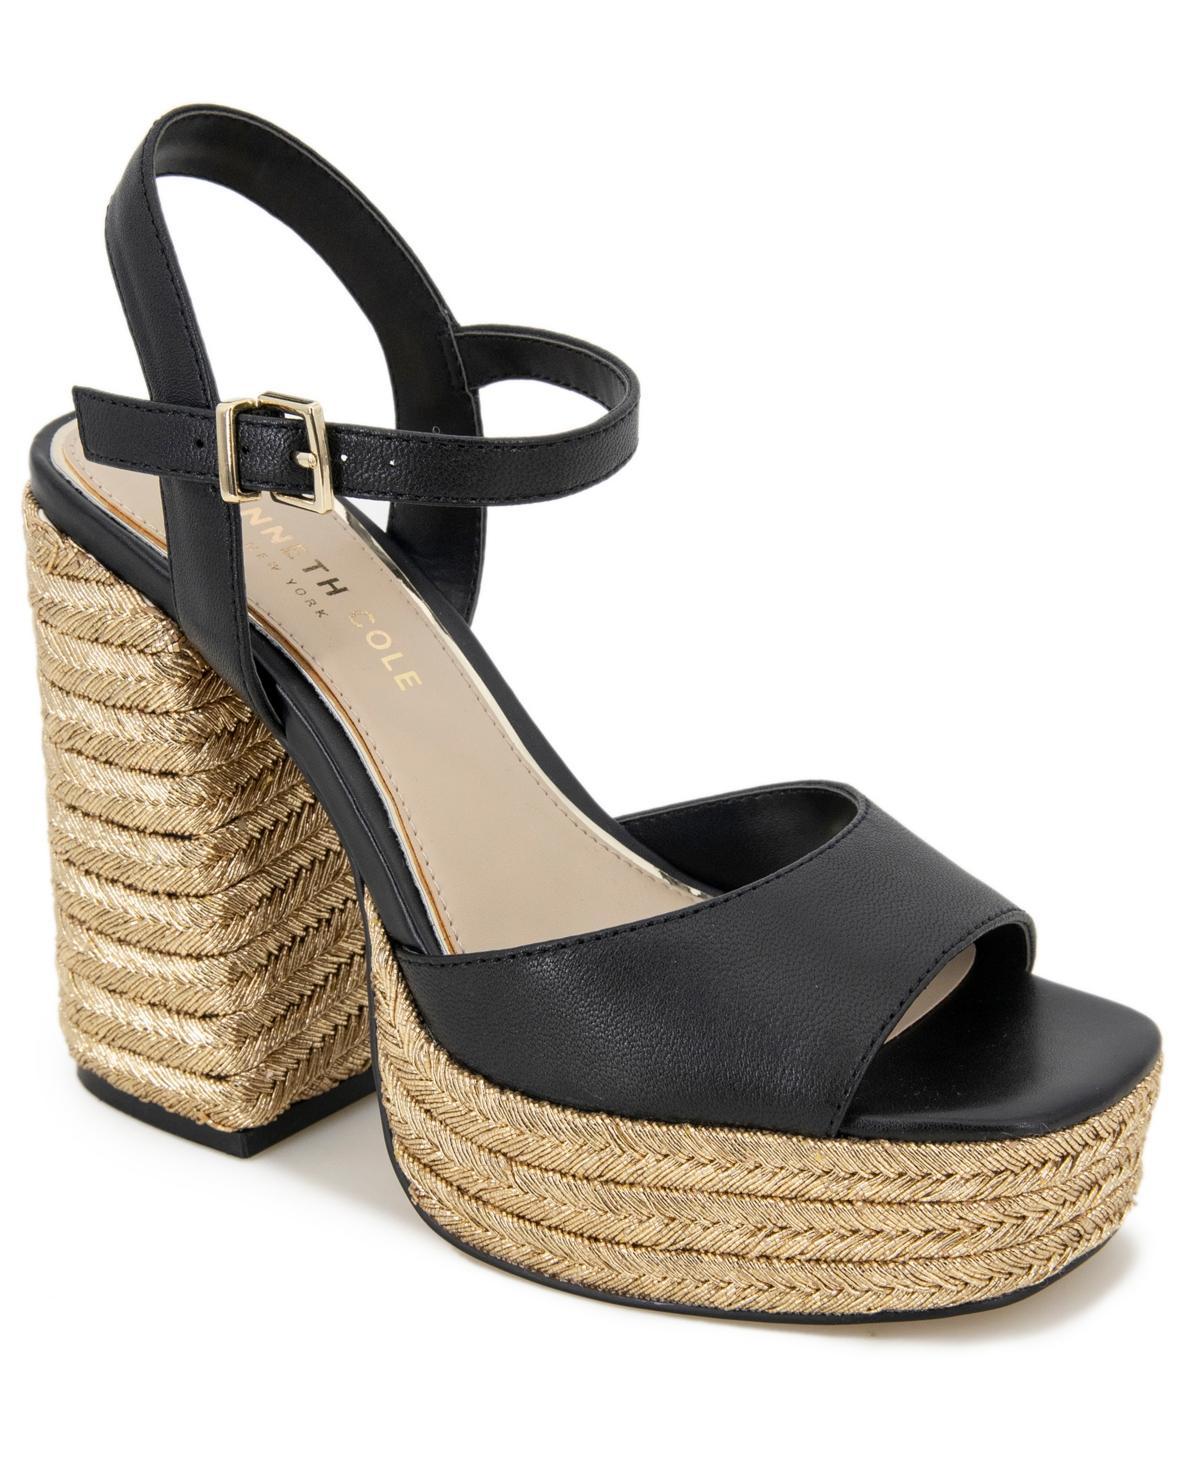 Kenneth Cole New York Womens Dolly Platform Sandals Womens Shoes Product Image